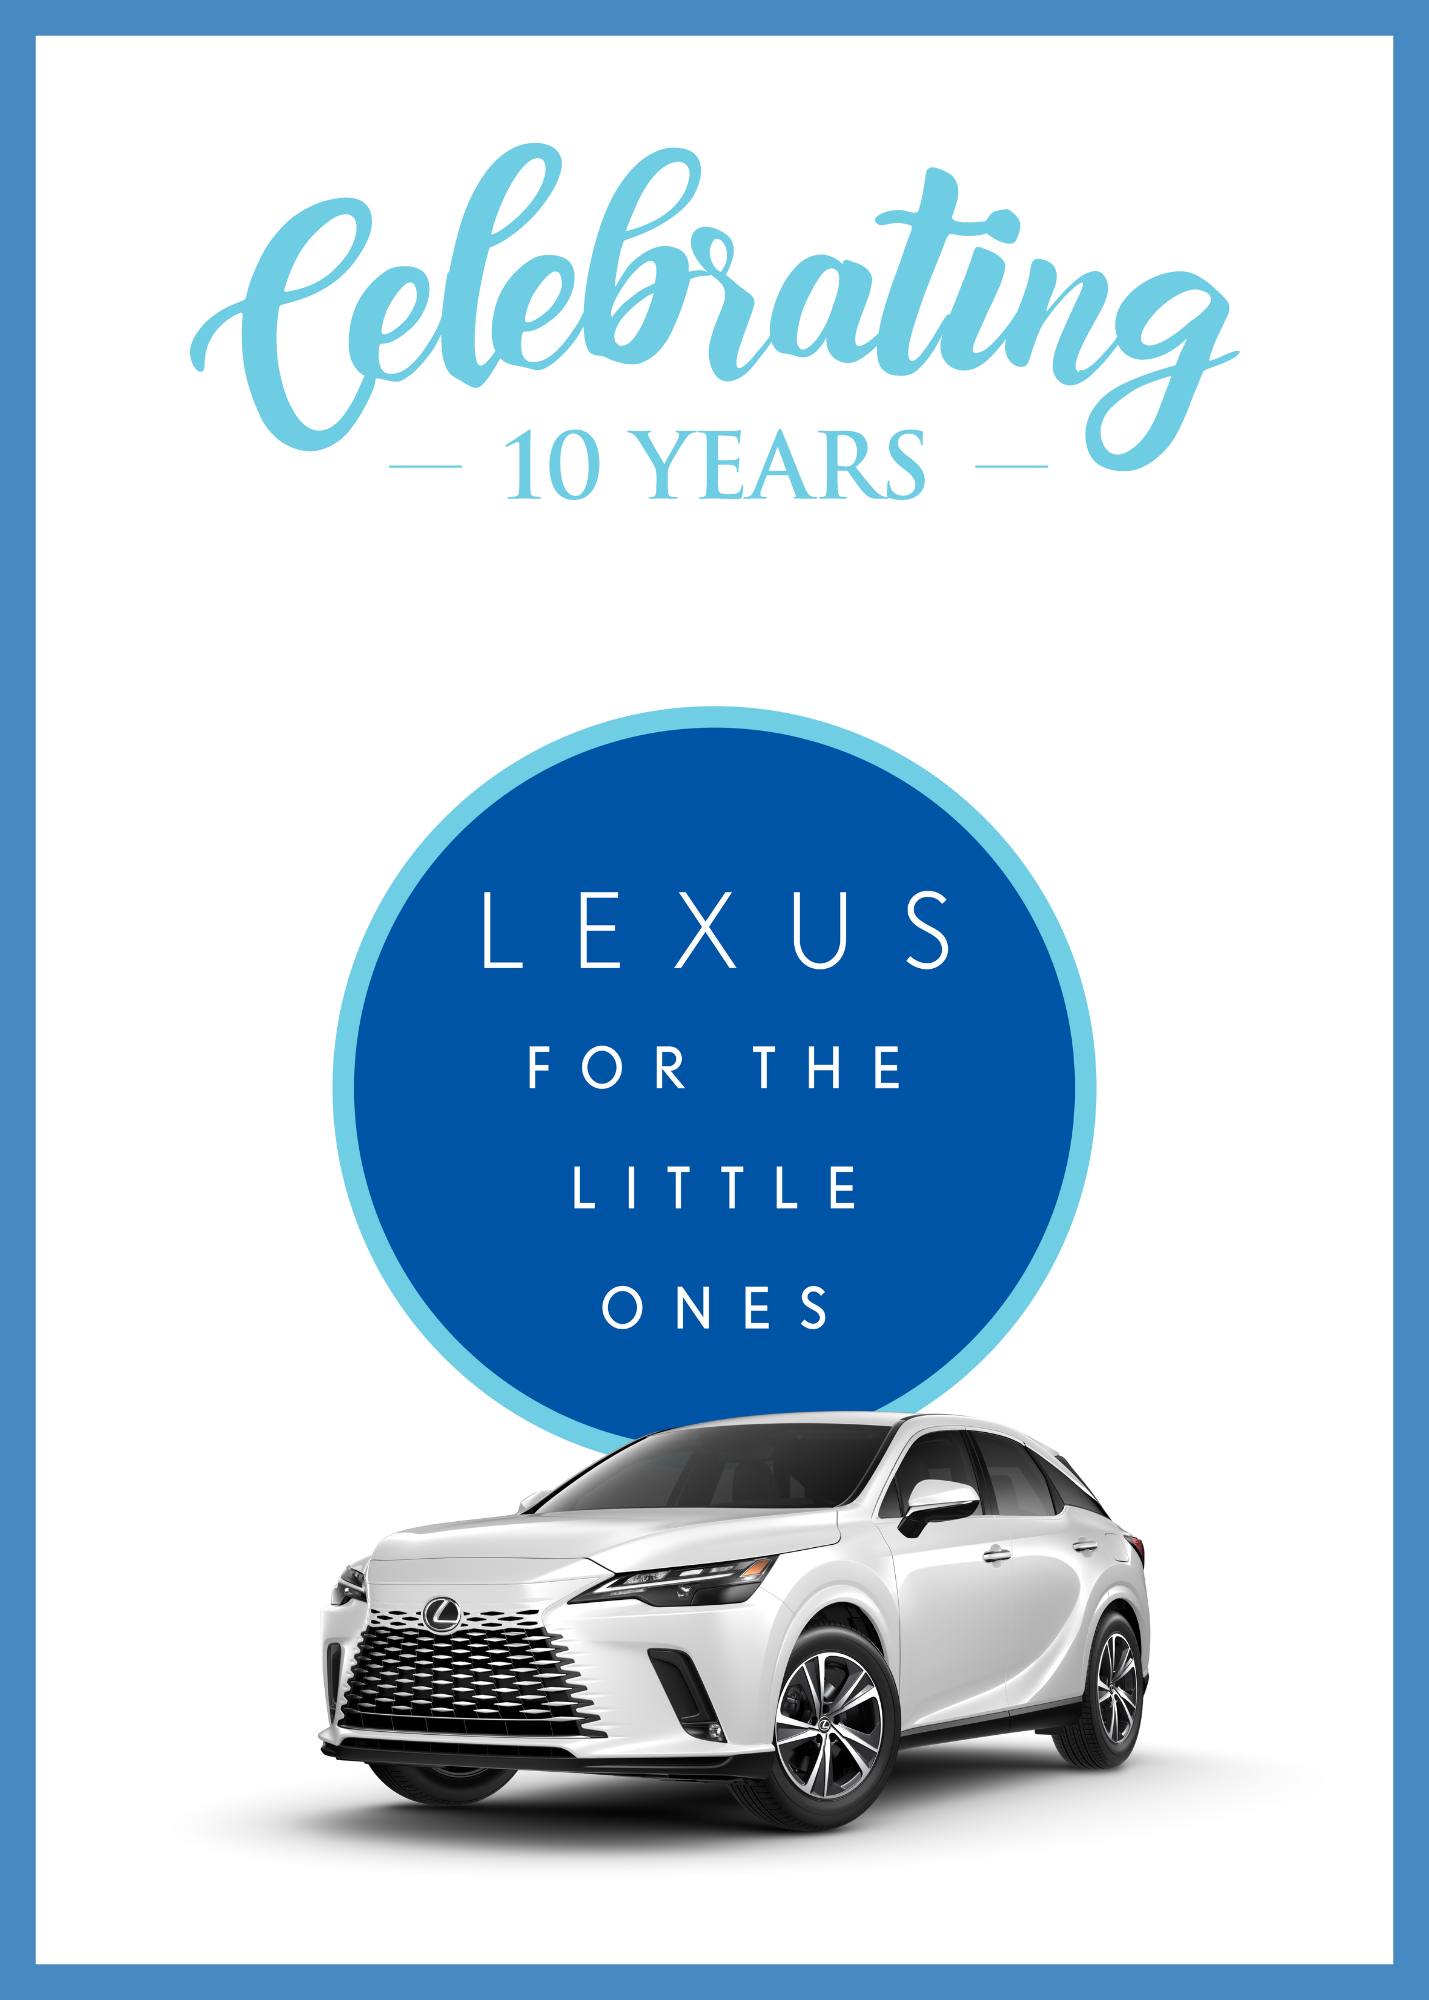 Celebrating 10 years of Lexus for the Little Ones